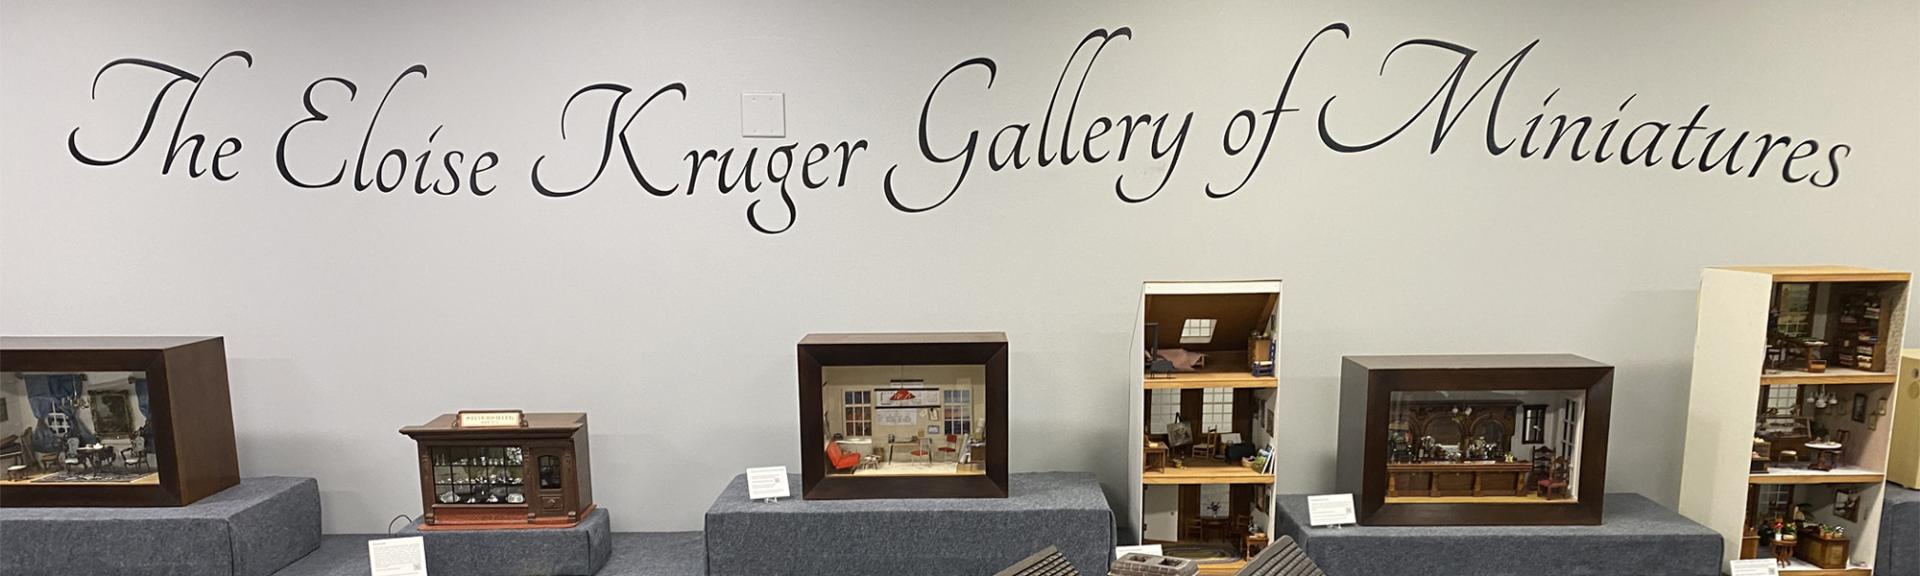 Kruger Gallery of Miniatures